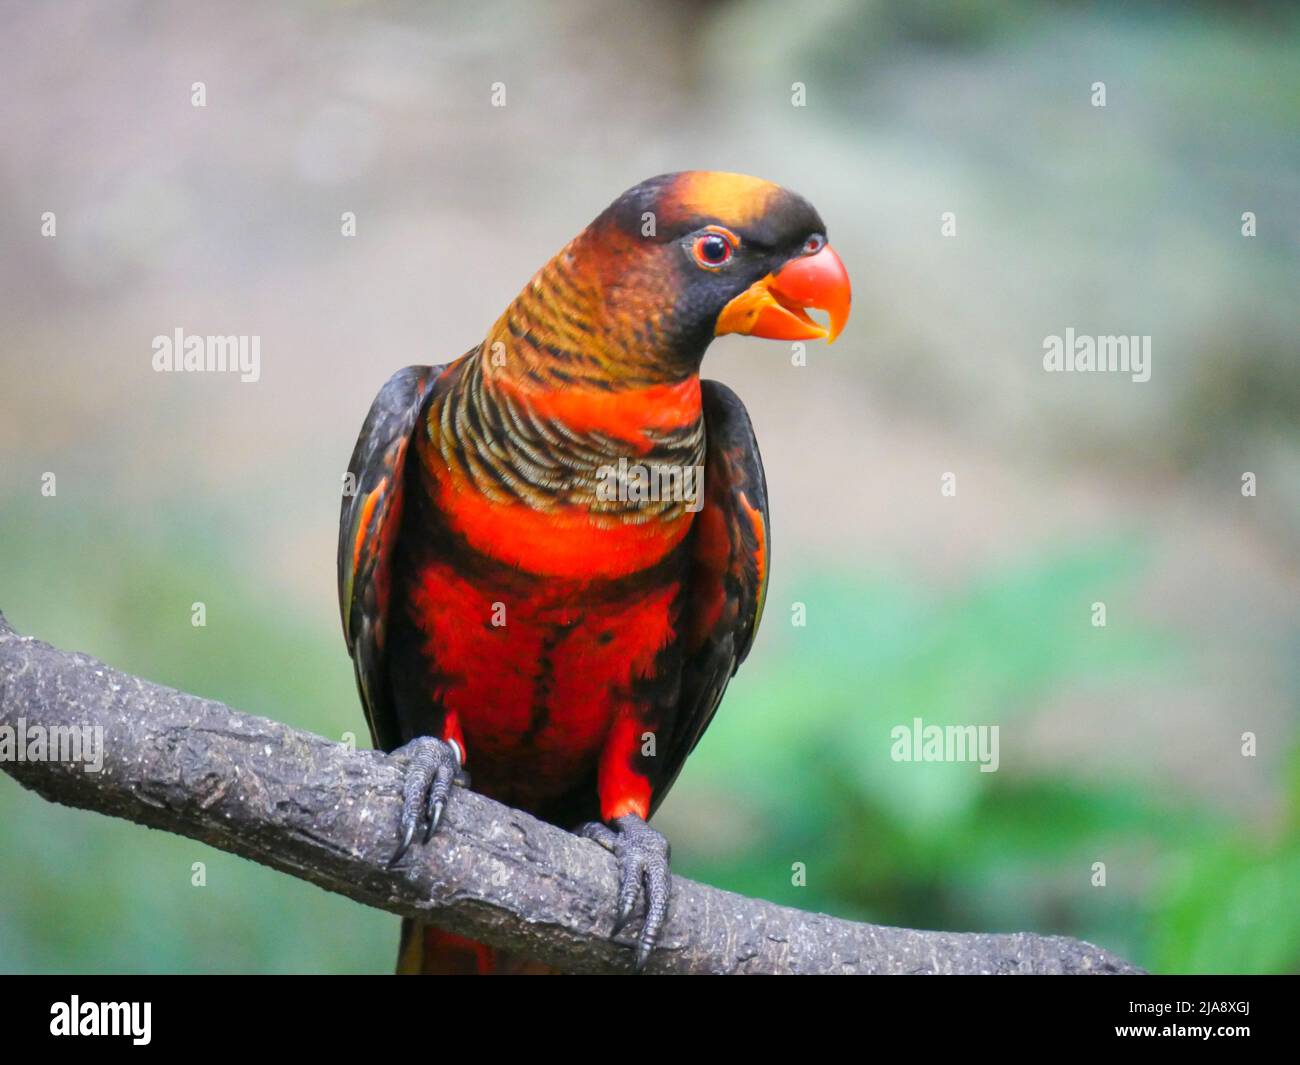 Dusky lory (Pseudeos fuscata) is a species of parrot also known as white-rumped lory, the dusky-orange lory, banded lories and duskies is seated on br Stock Photo